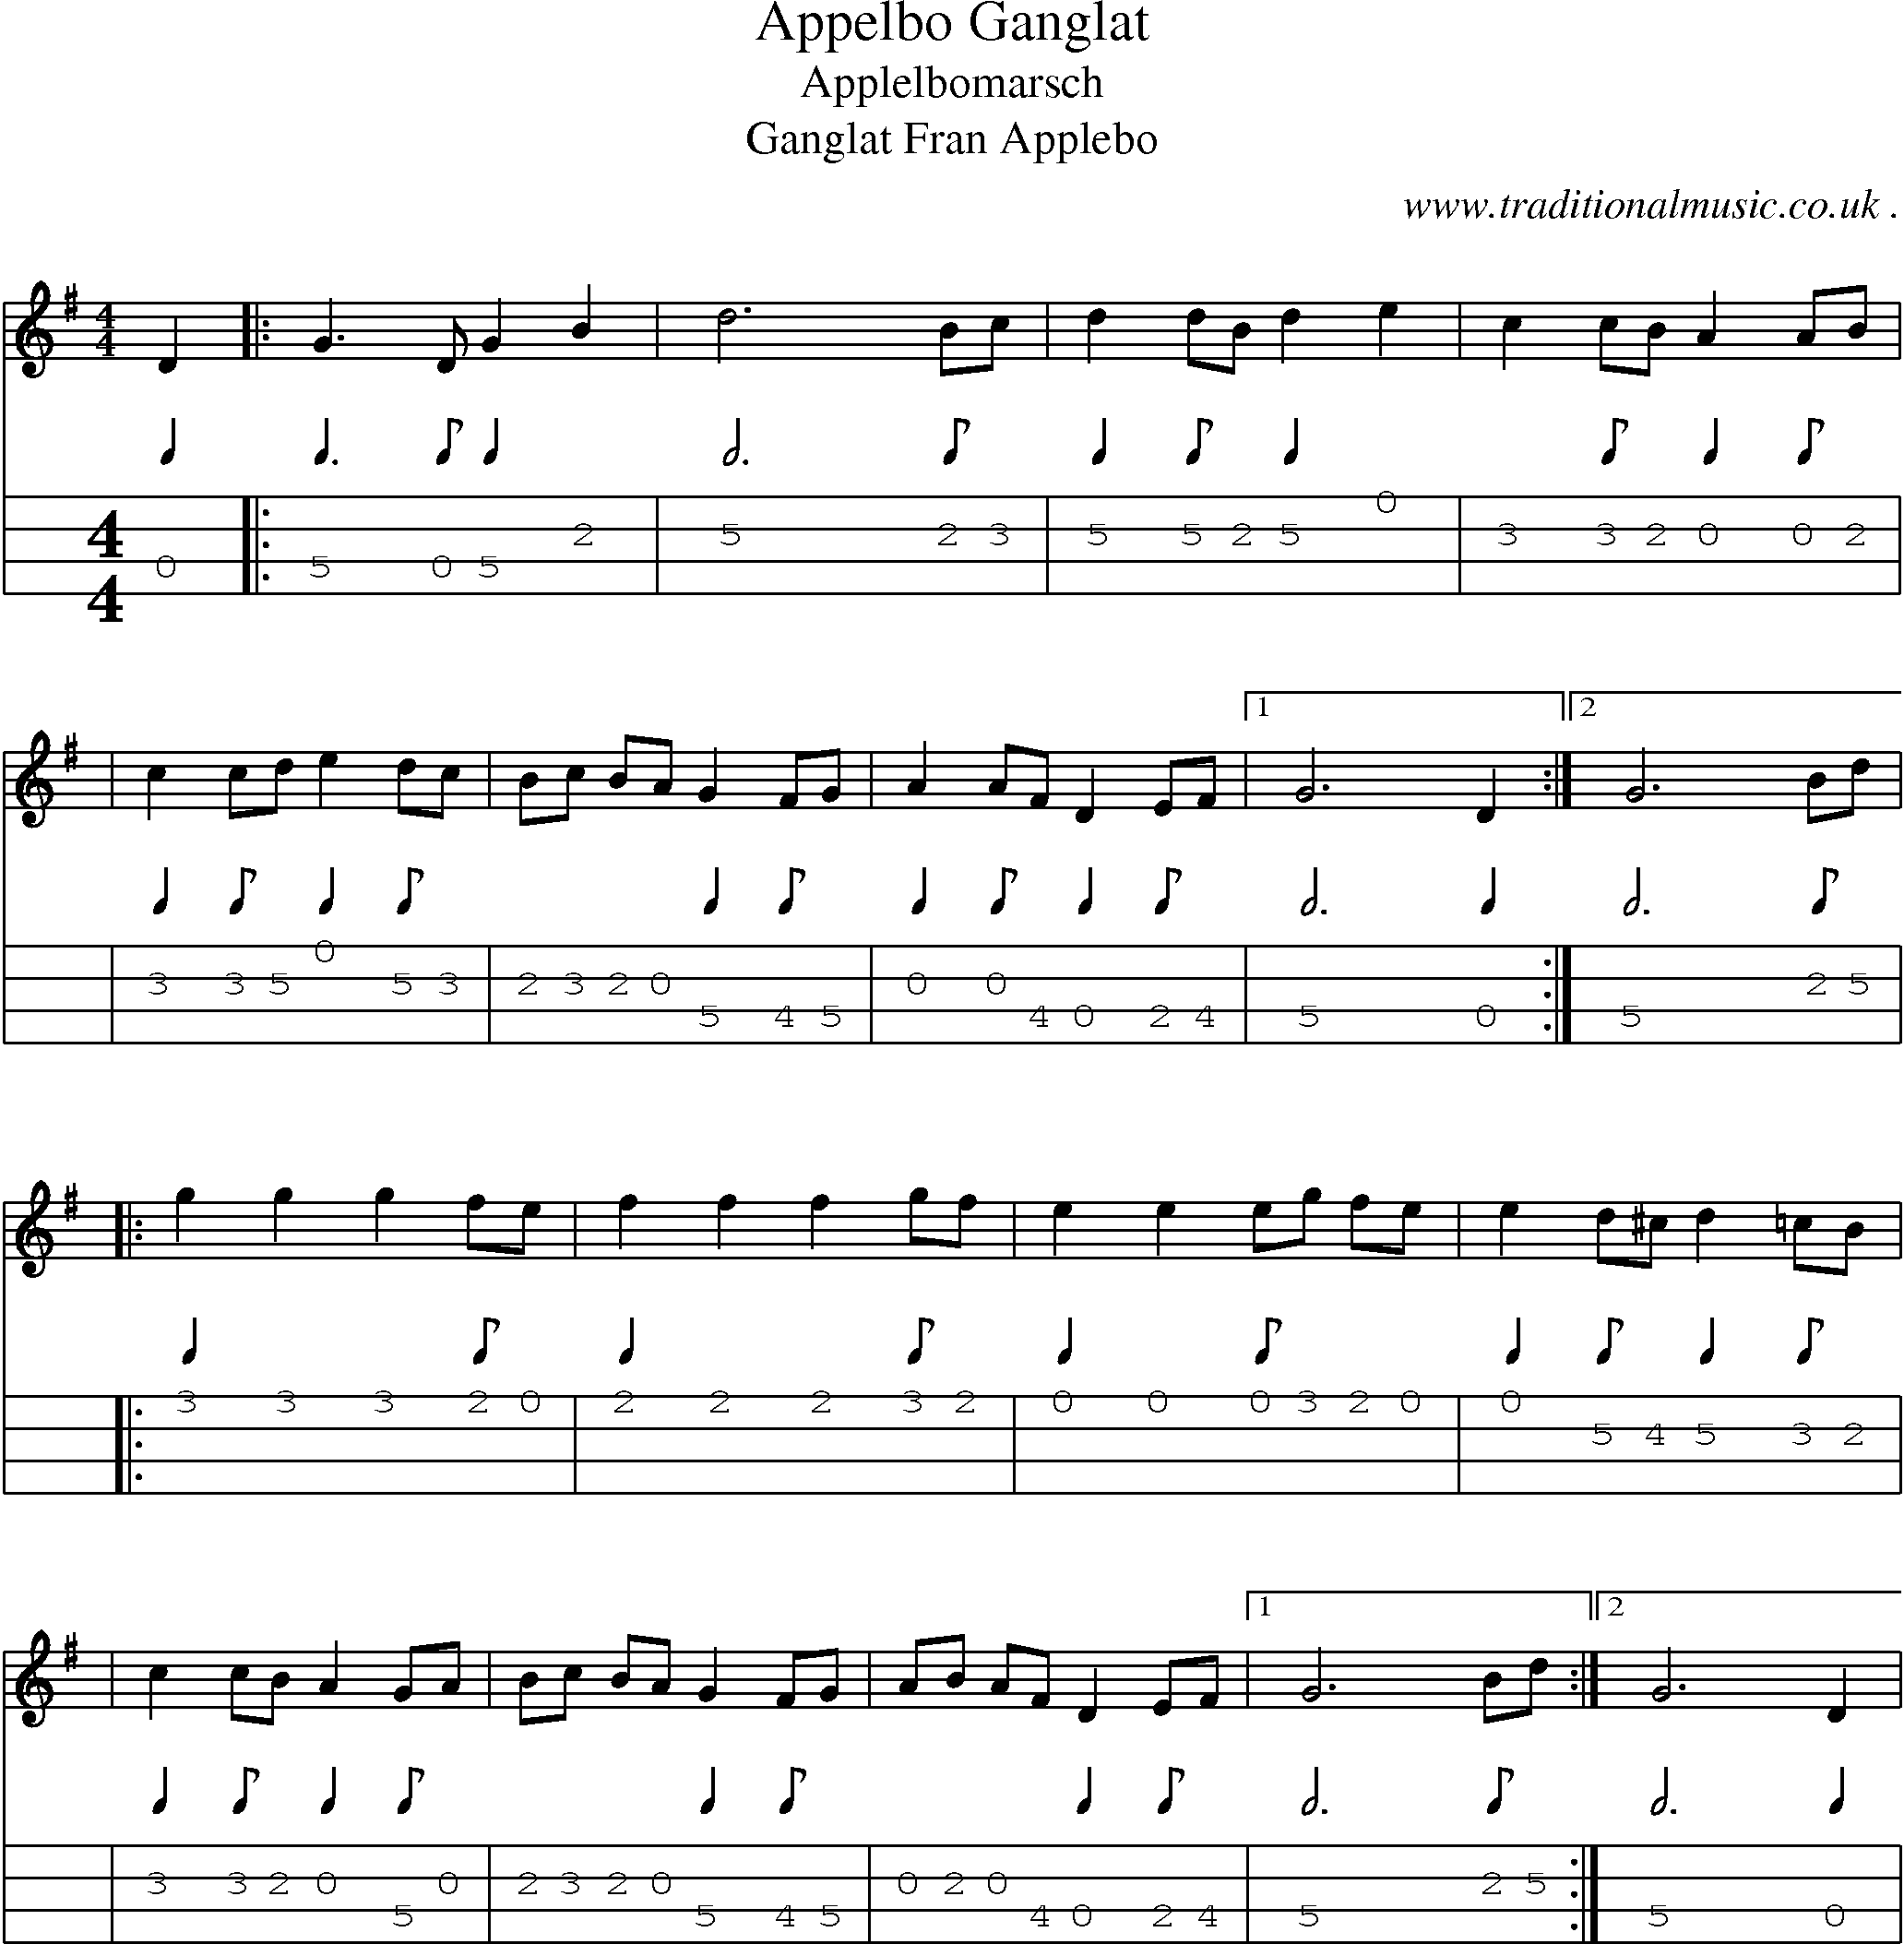 Sheet-Music and Mandolin Tabs for Appelbo Ganglat